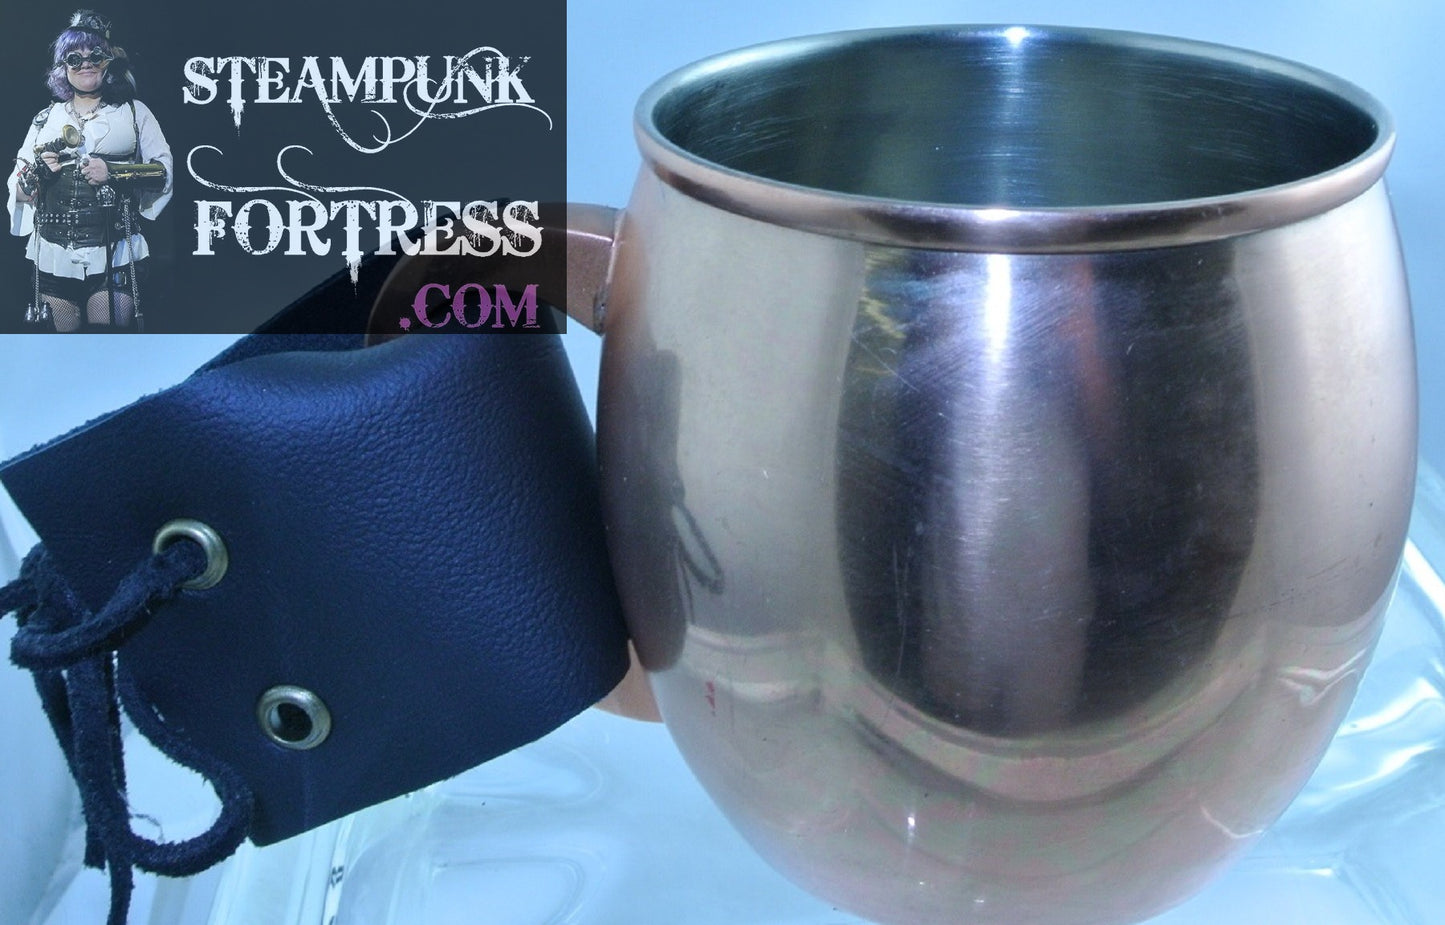 COPPER CUP MUG BLACK LEATHER STRAP BRASS EYELETS TEA DUELING DUELLING COSPLAY COSTUME RENAISSANCE MEDIEVAL SCA STARR WILDE STEAMPUNK FORTRESS